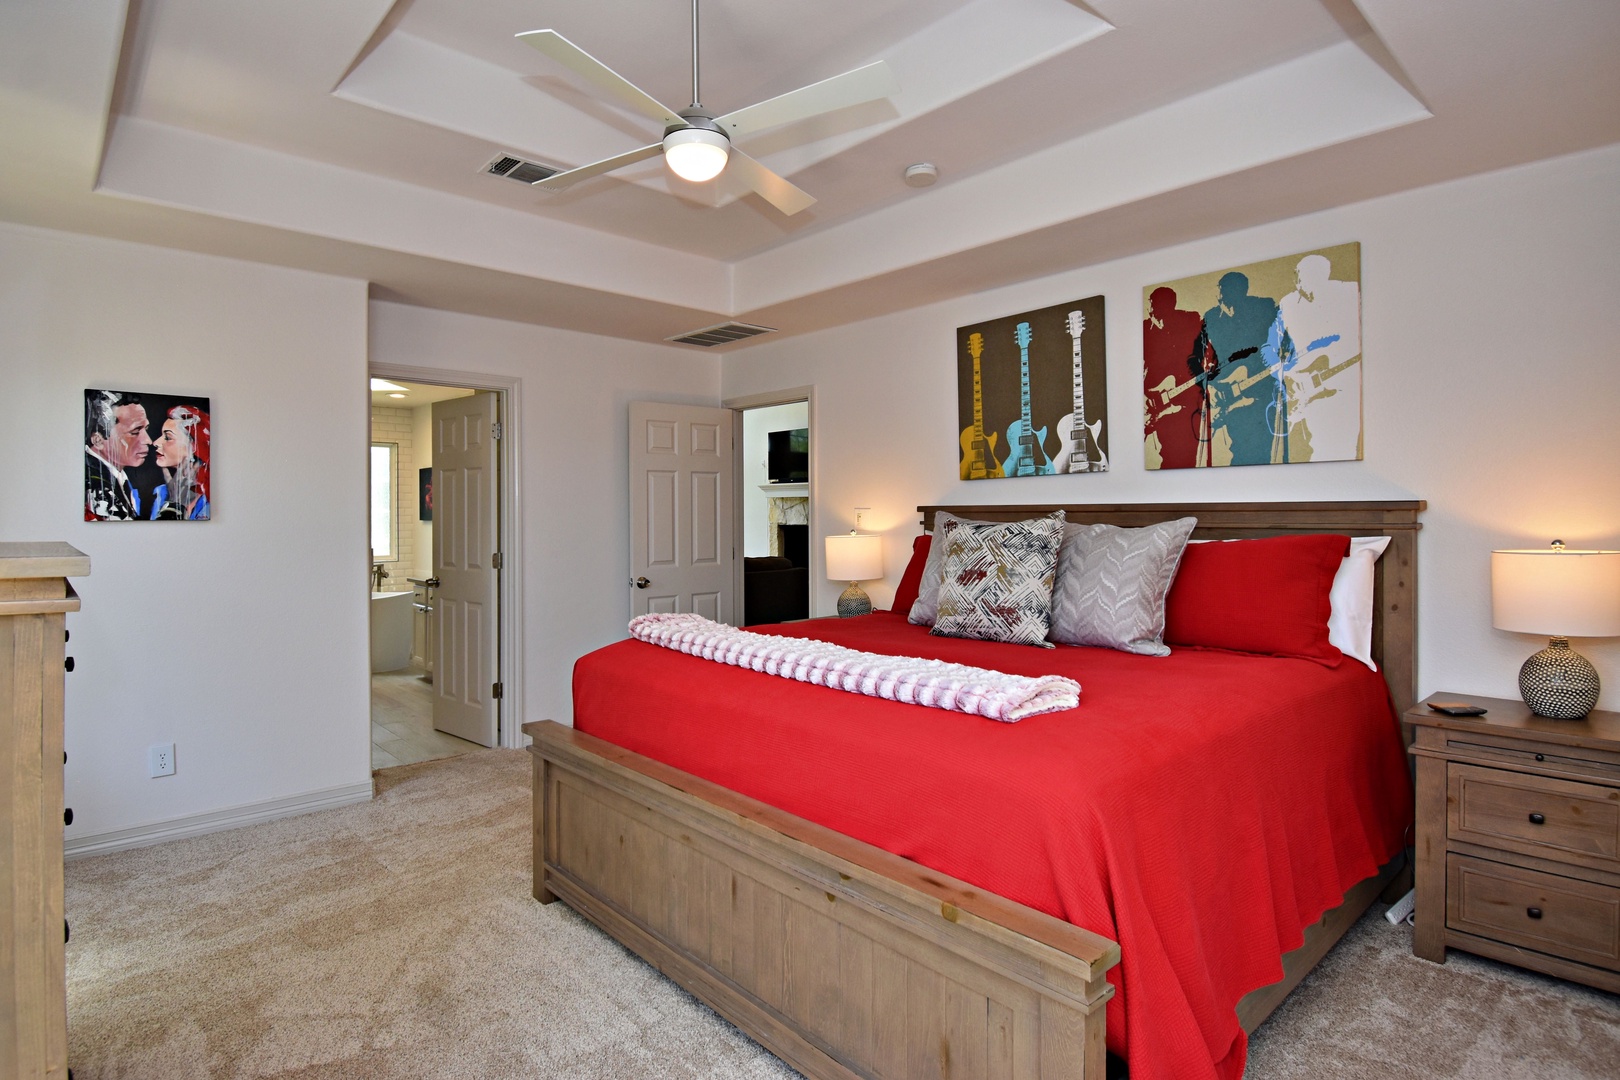 Master bedroom is equipped with a king and en-suite